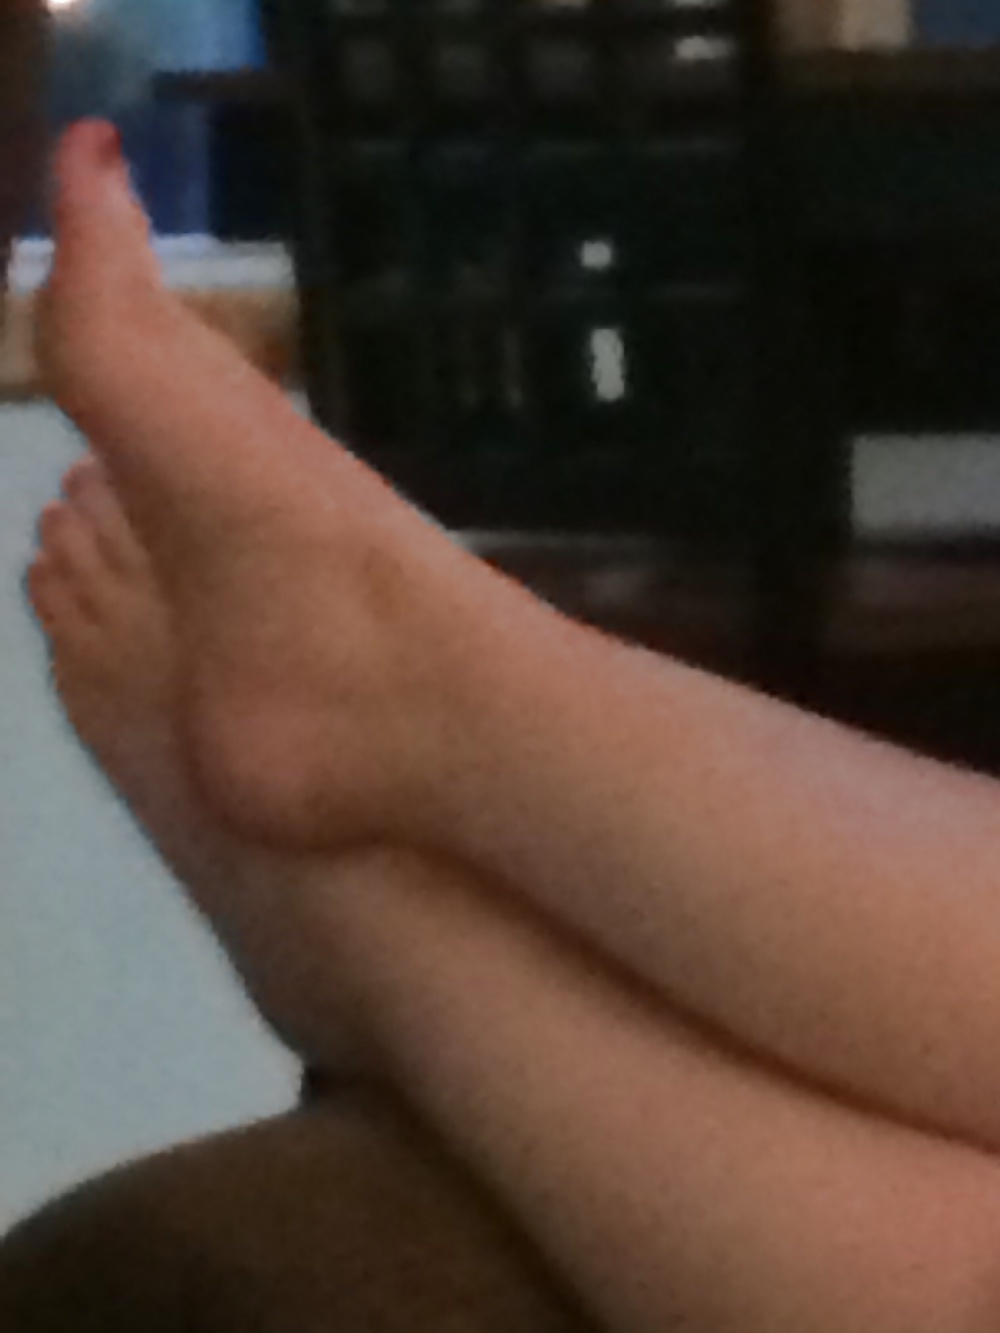 Wife's dirty feet from wearing flip flops all day porn pictures